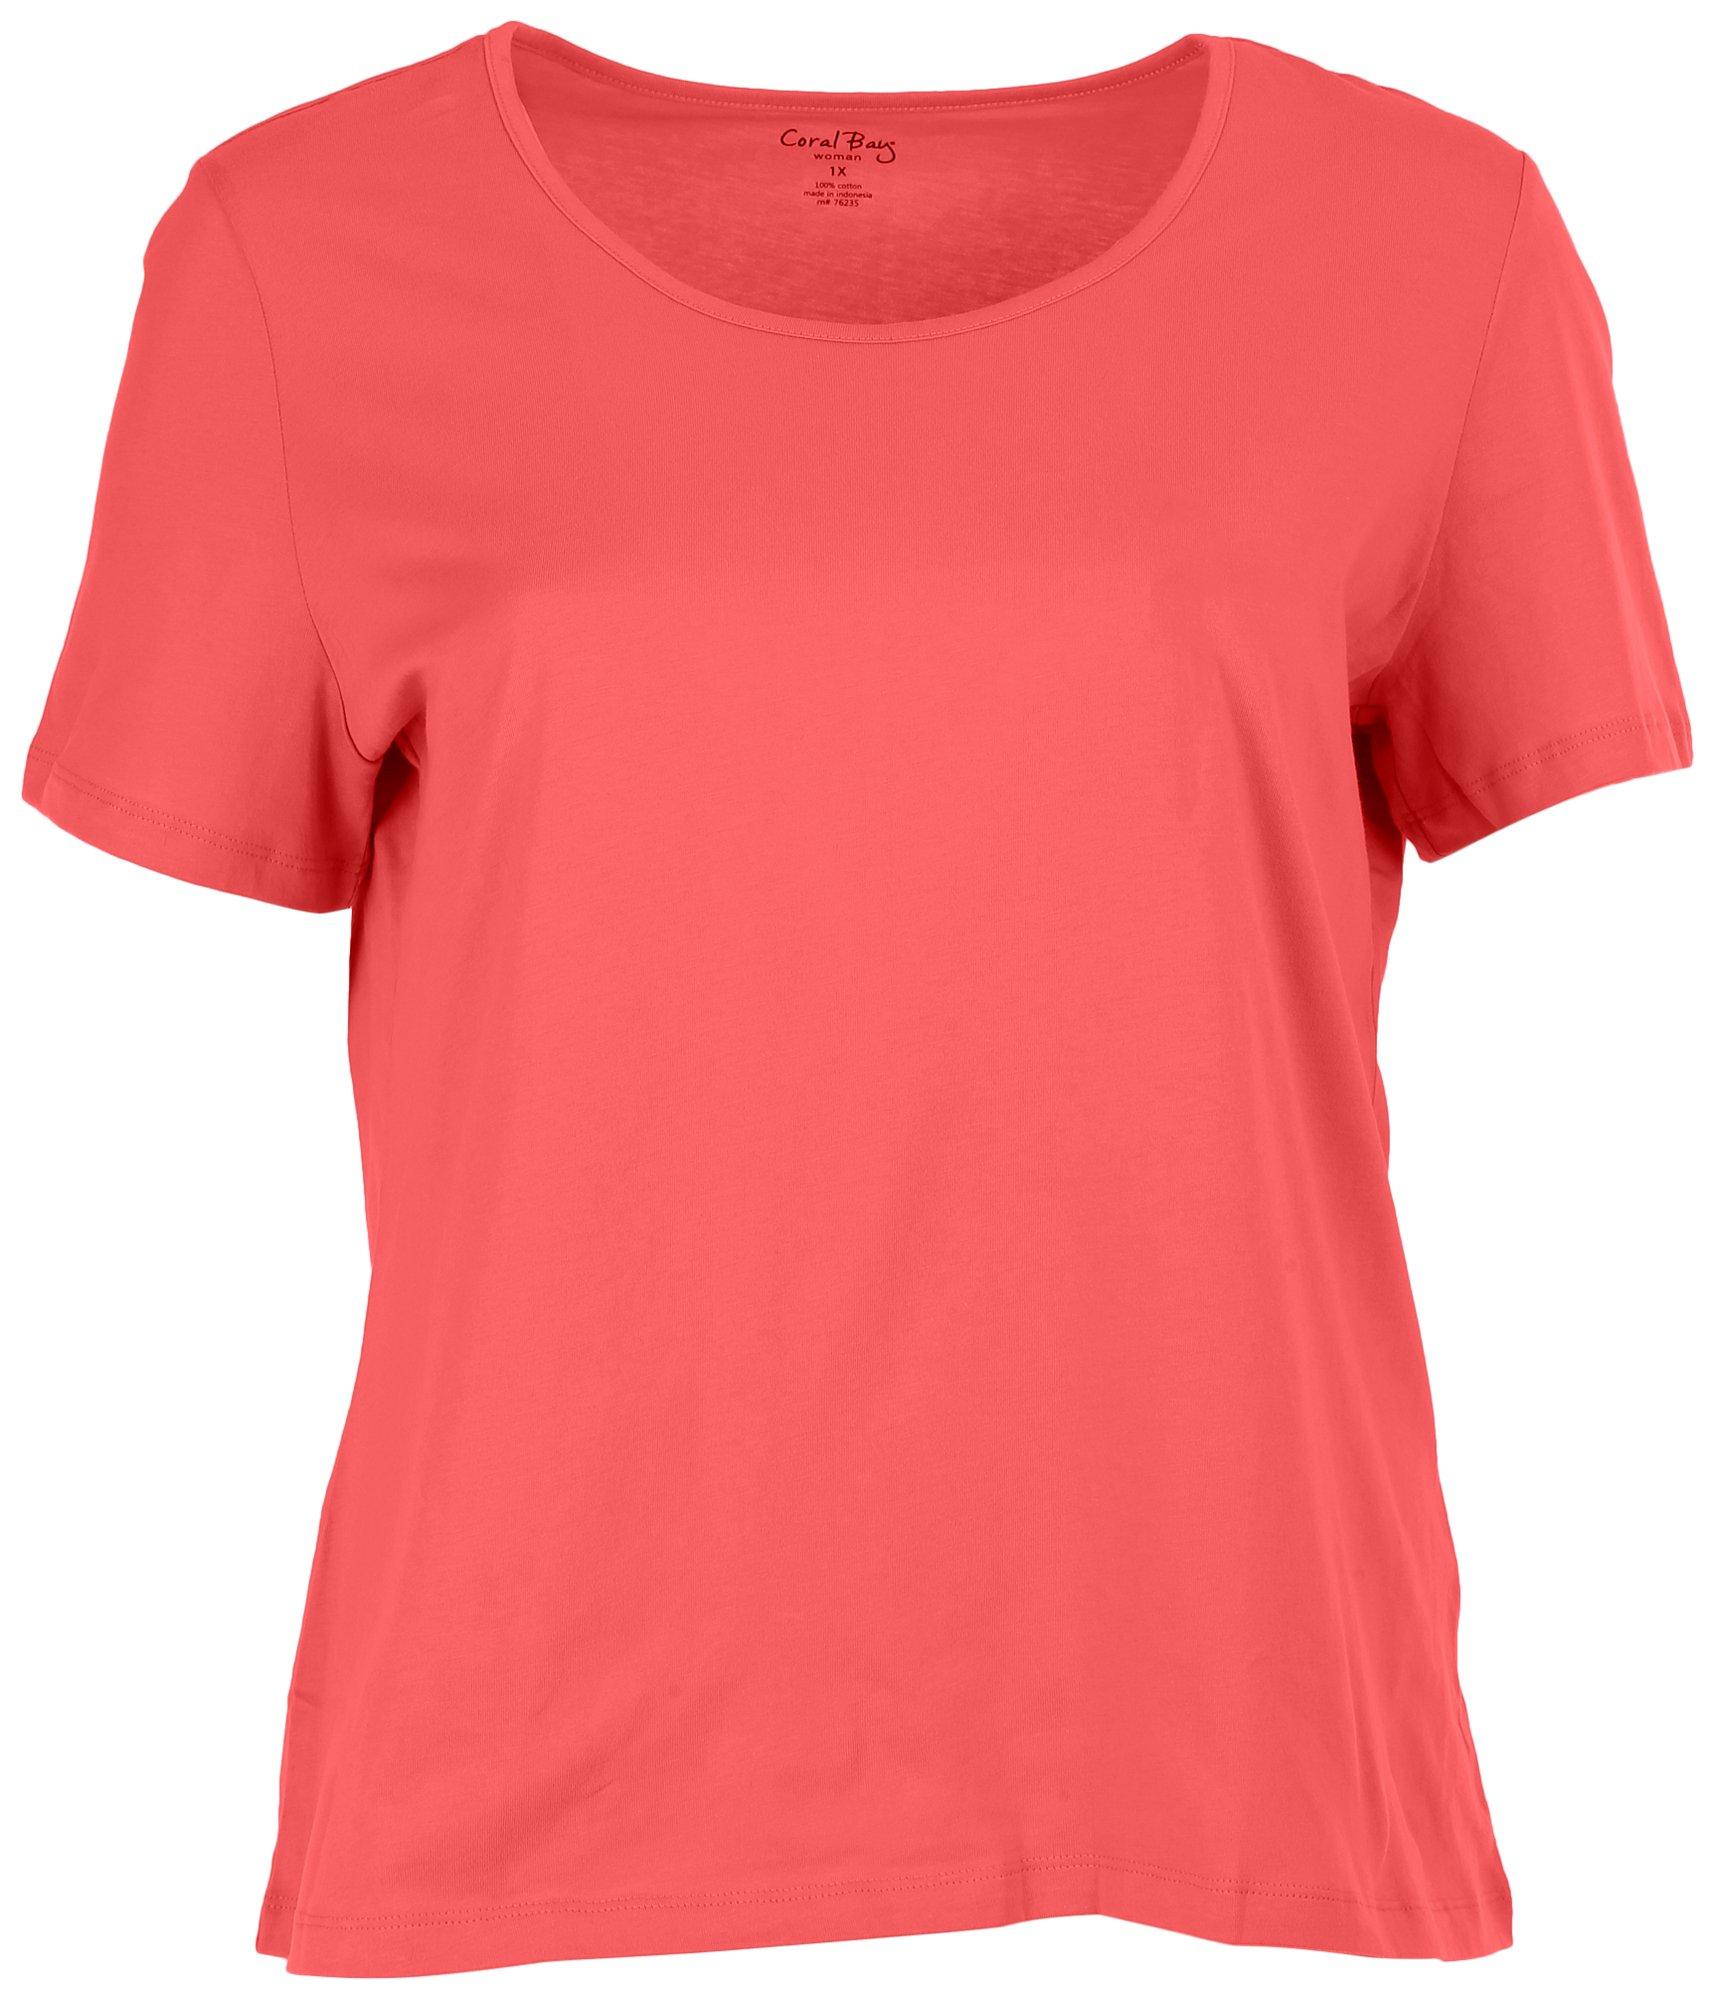 Coral Bay Plus Solid Jewel Band Short Sleeve